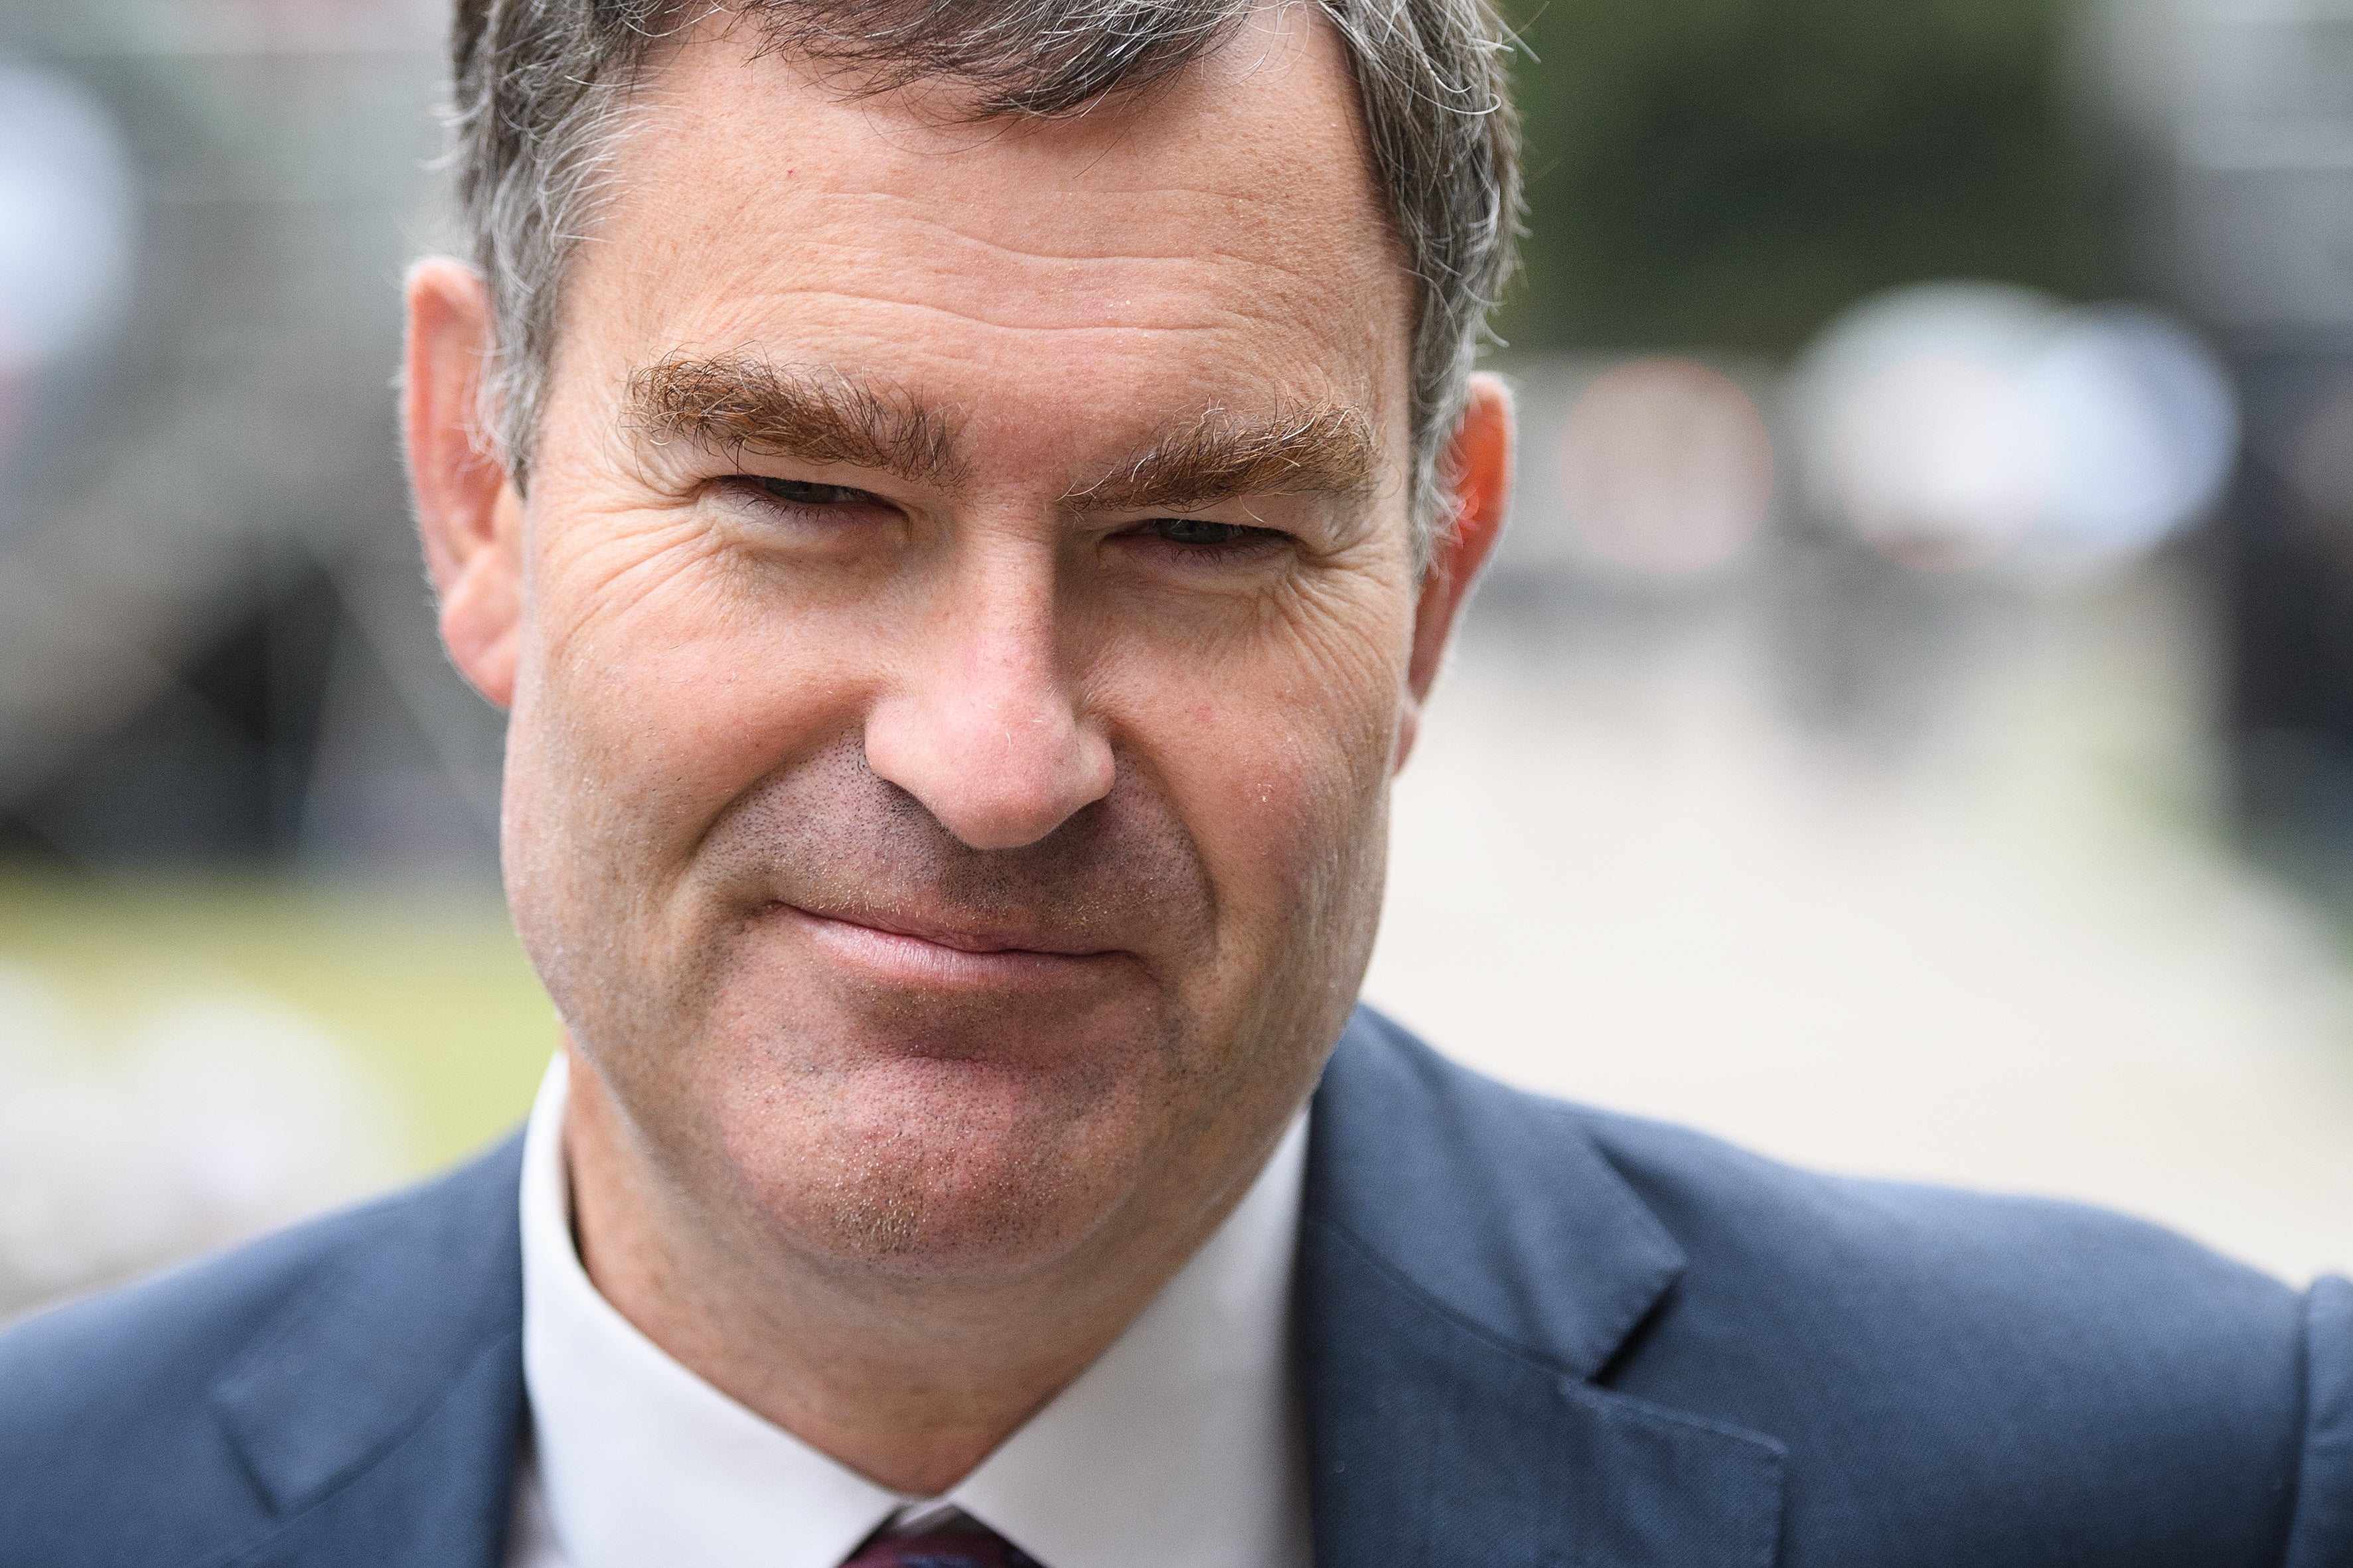 Gauke was a junior Treasury minister from the start of the coalition government in 2010